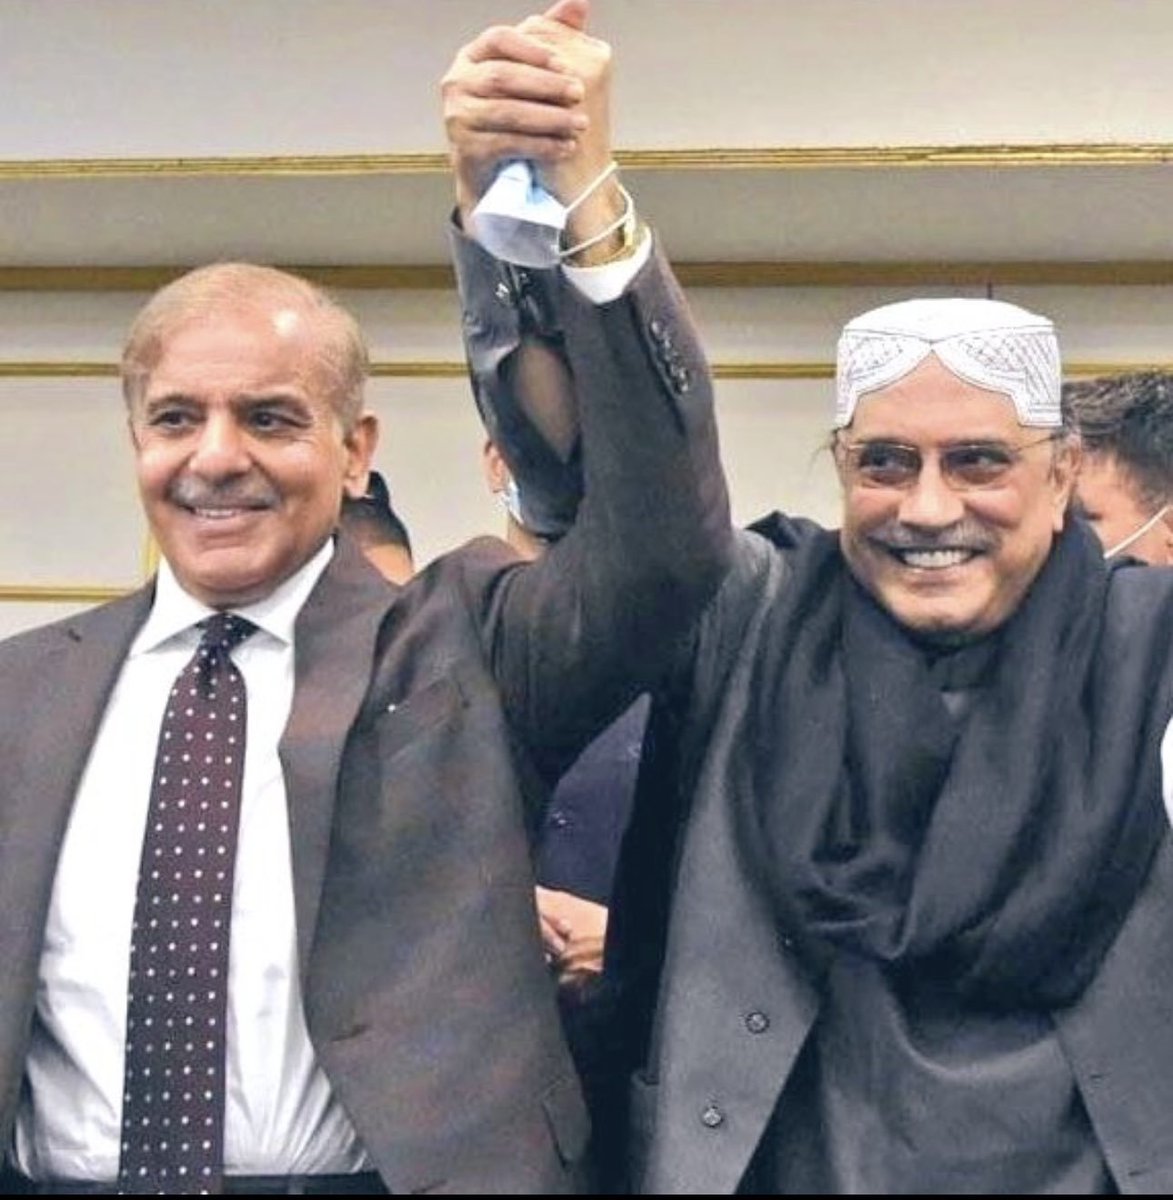 It's 2024 & traitor Generals have chosen this duo for the Islamic Republic of Pakistan. Generals can't stop their addiction of sucking Zardari & Sharif dicks

For decades, Generals told everyone about their corruption & treachery (DawnLeaks/MemoGate)

Fuck these traitor Generals.